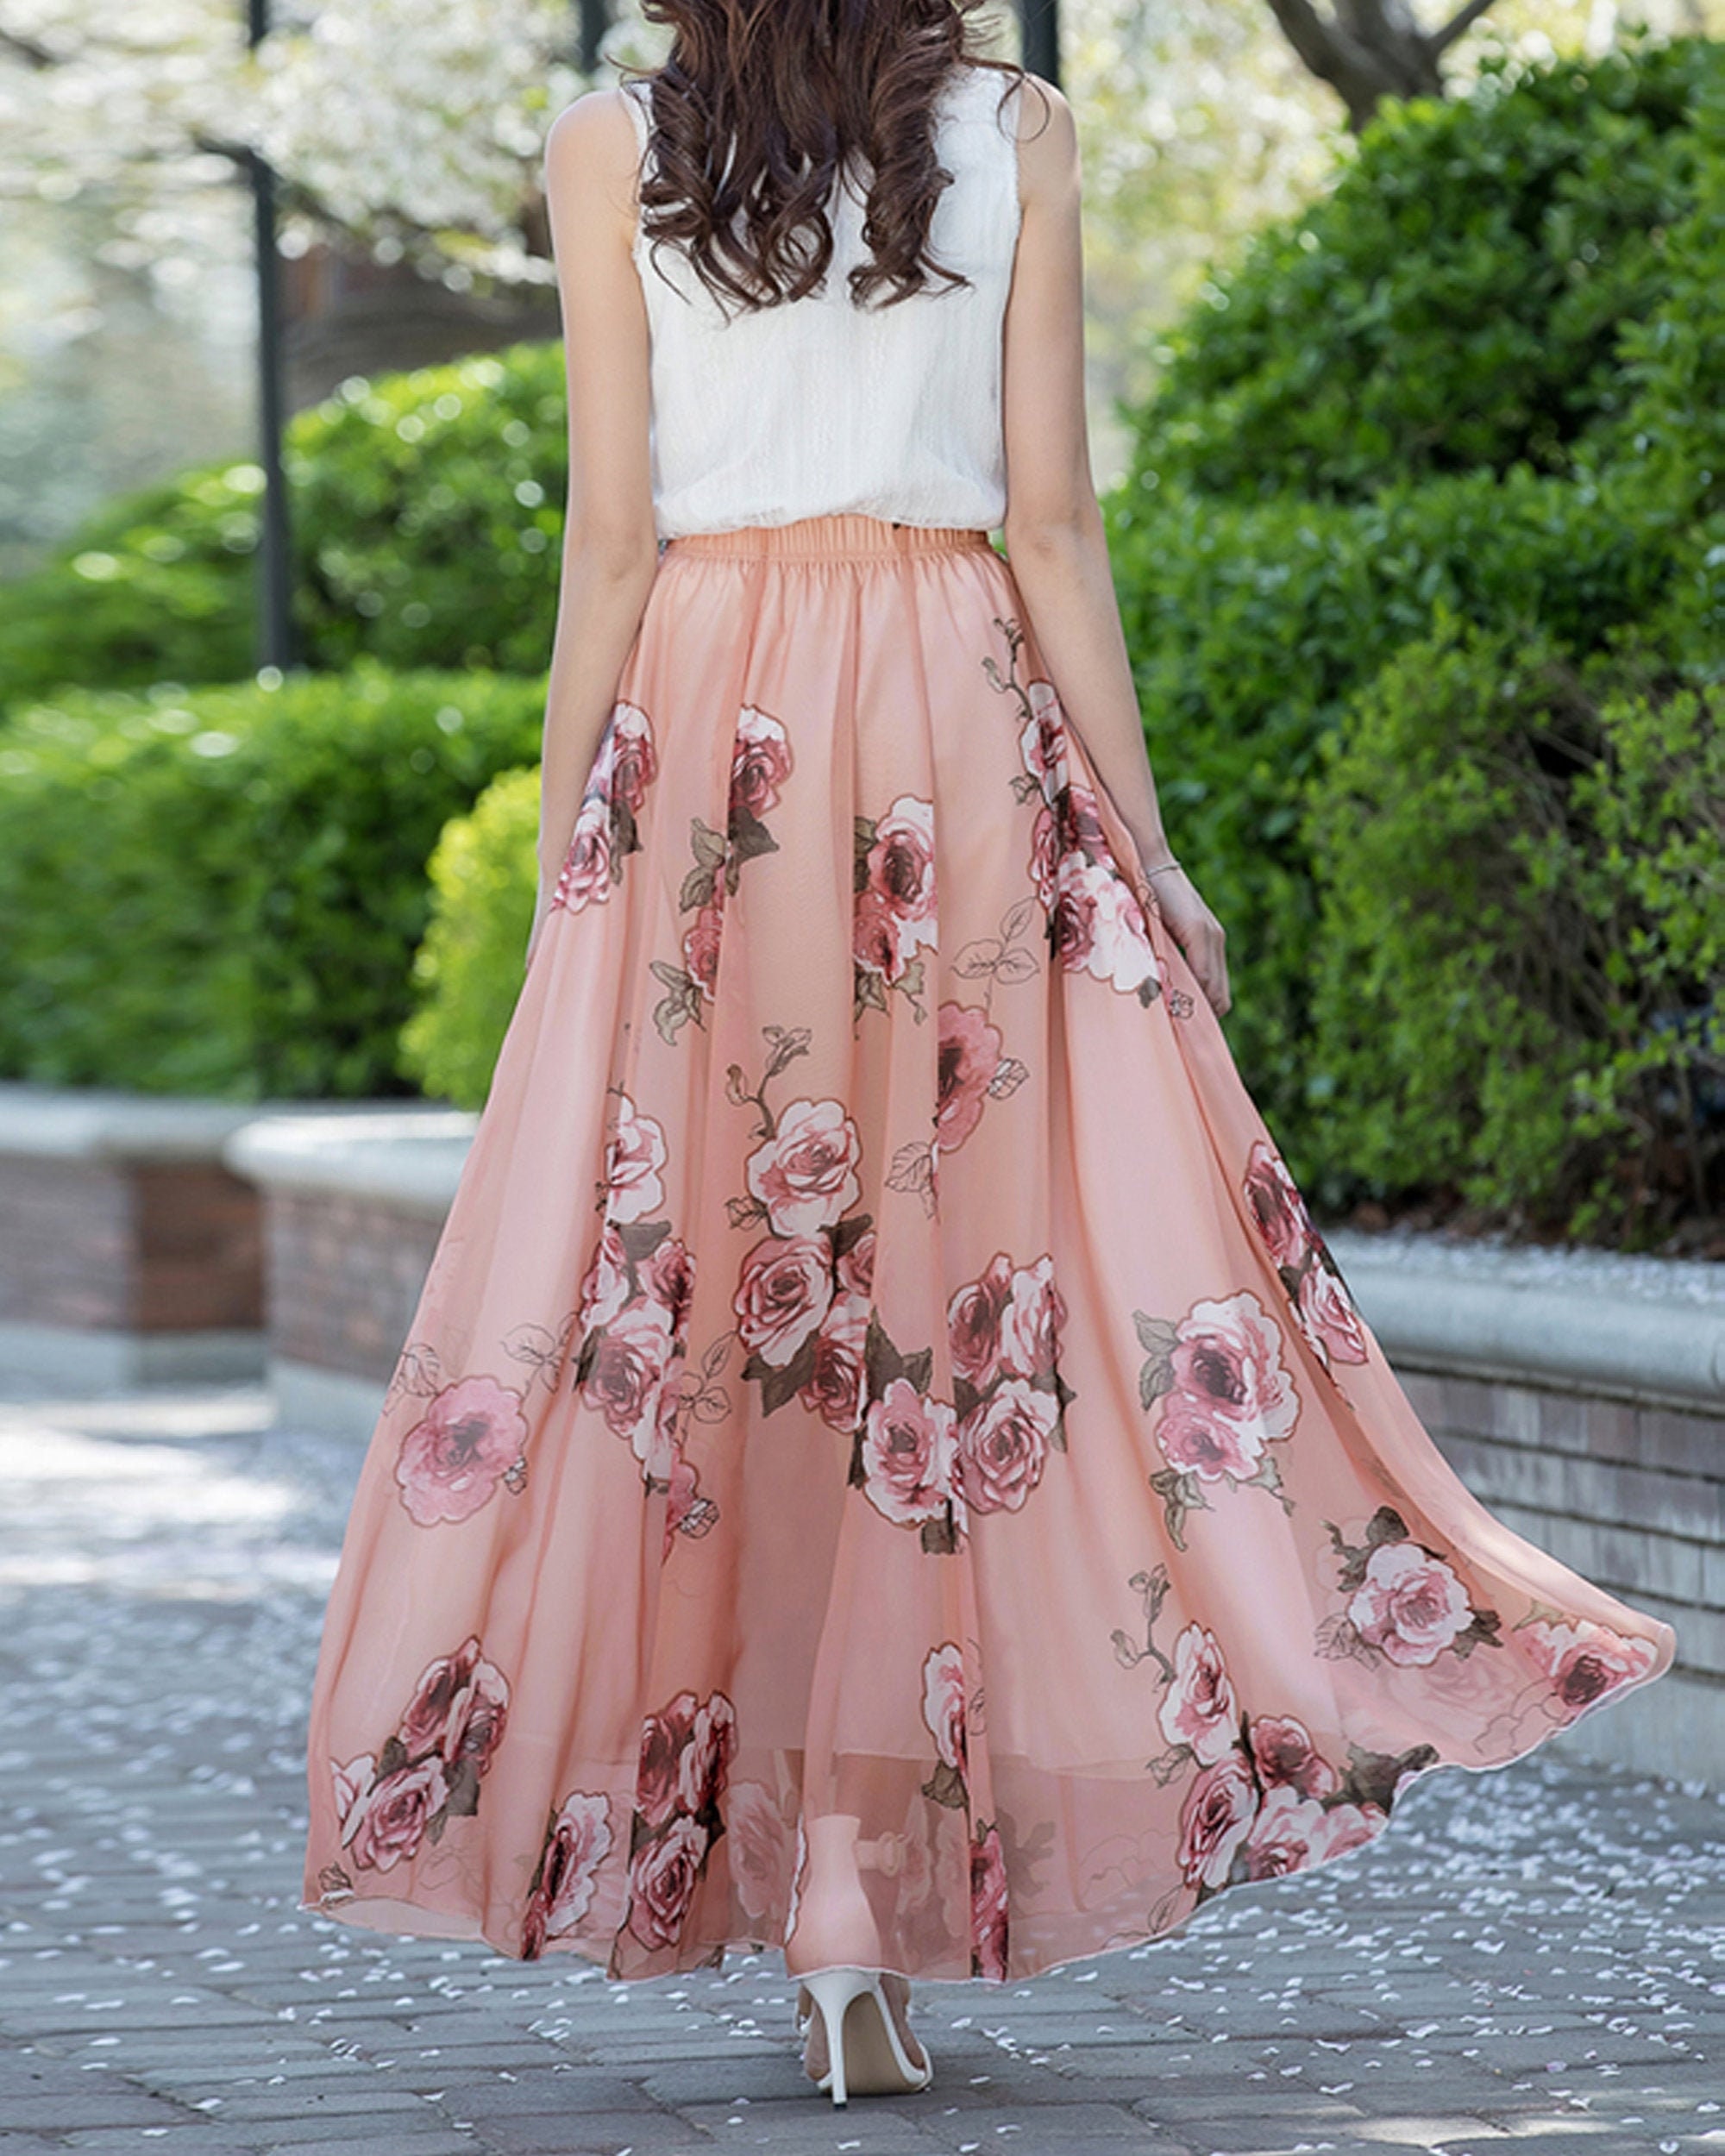 Elegant chiffon fabric flair skirt floral print and plated body